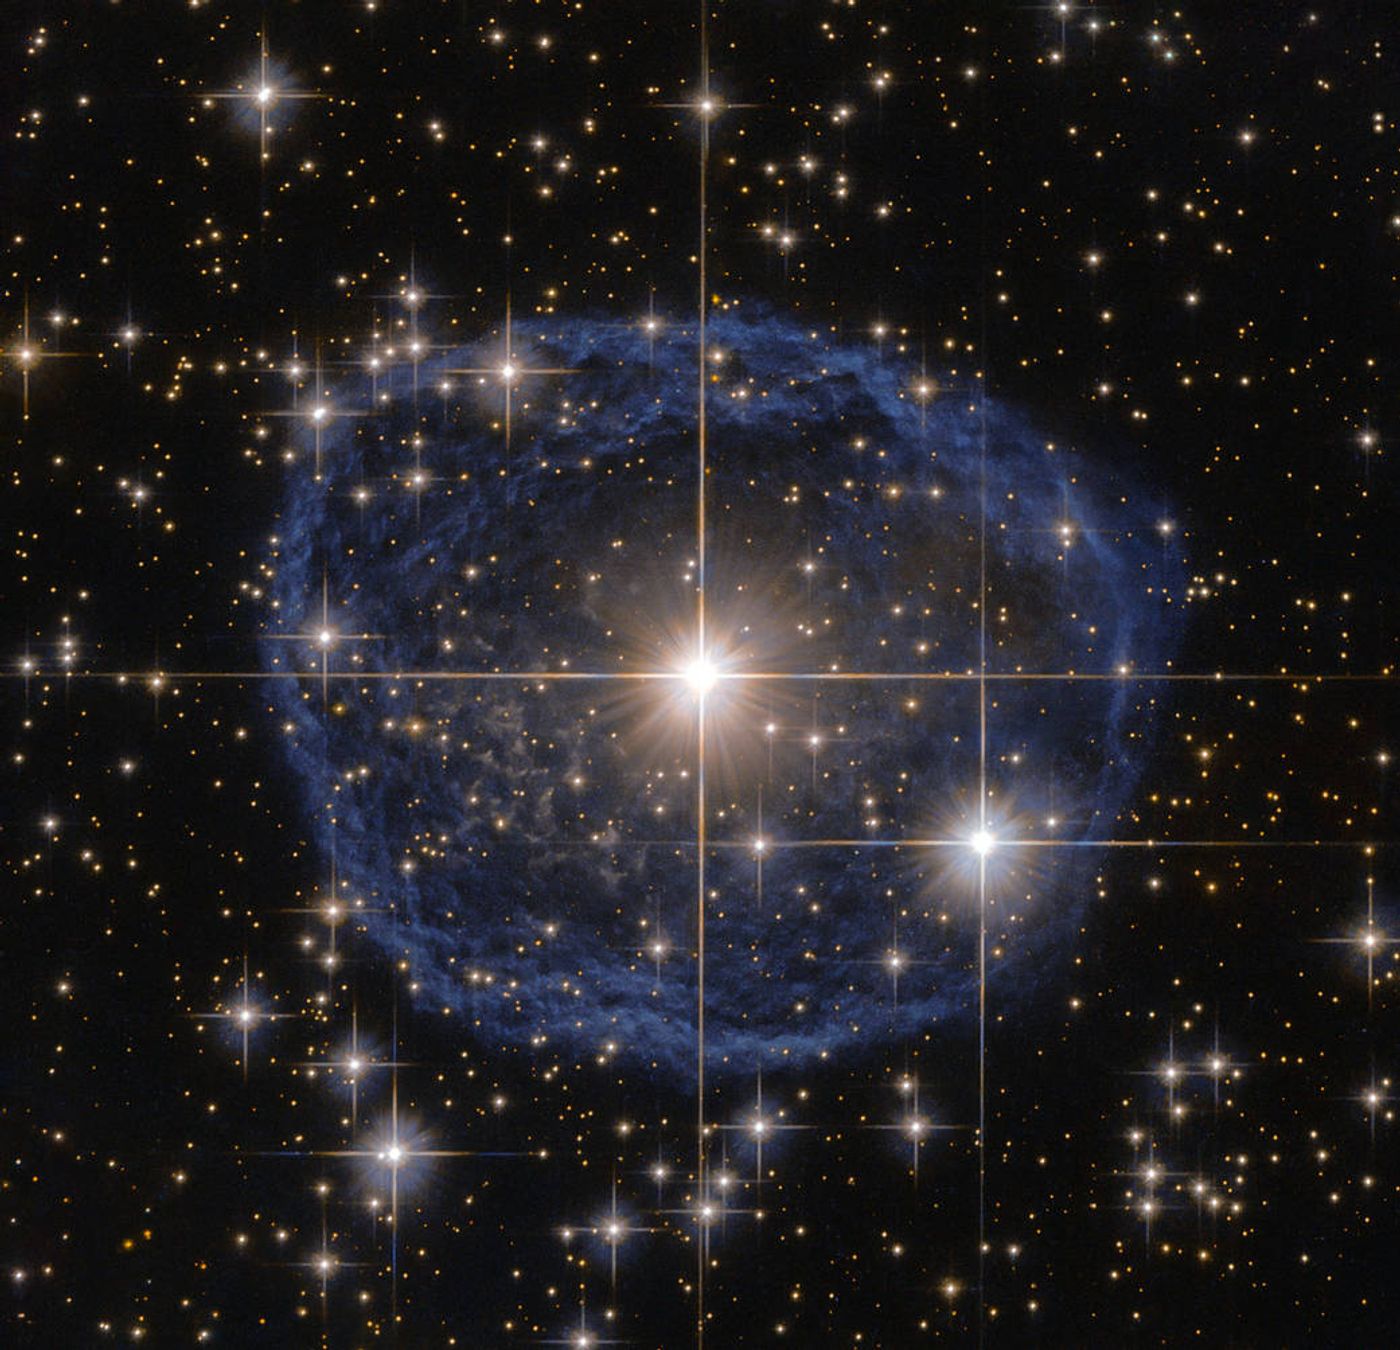 The Hubble Space Telescope captures a great image of a blue nebula surrounding Wolf-Rayet star WR 31a.